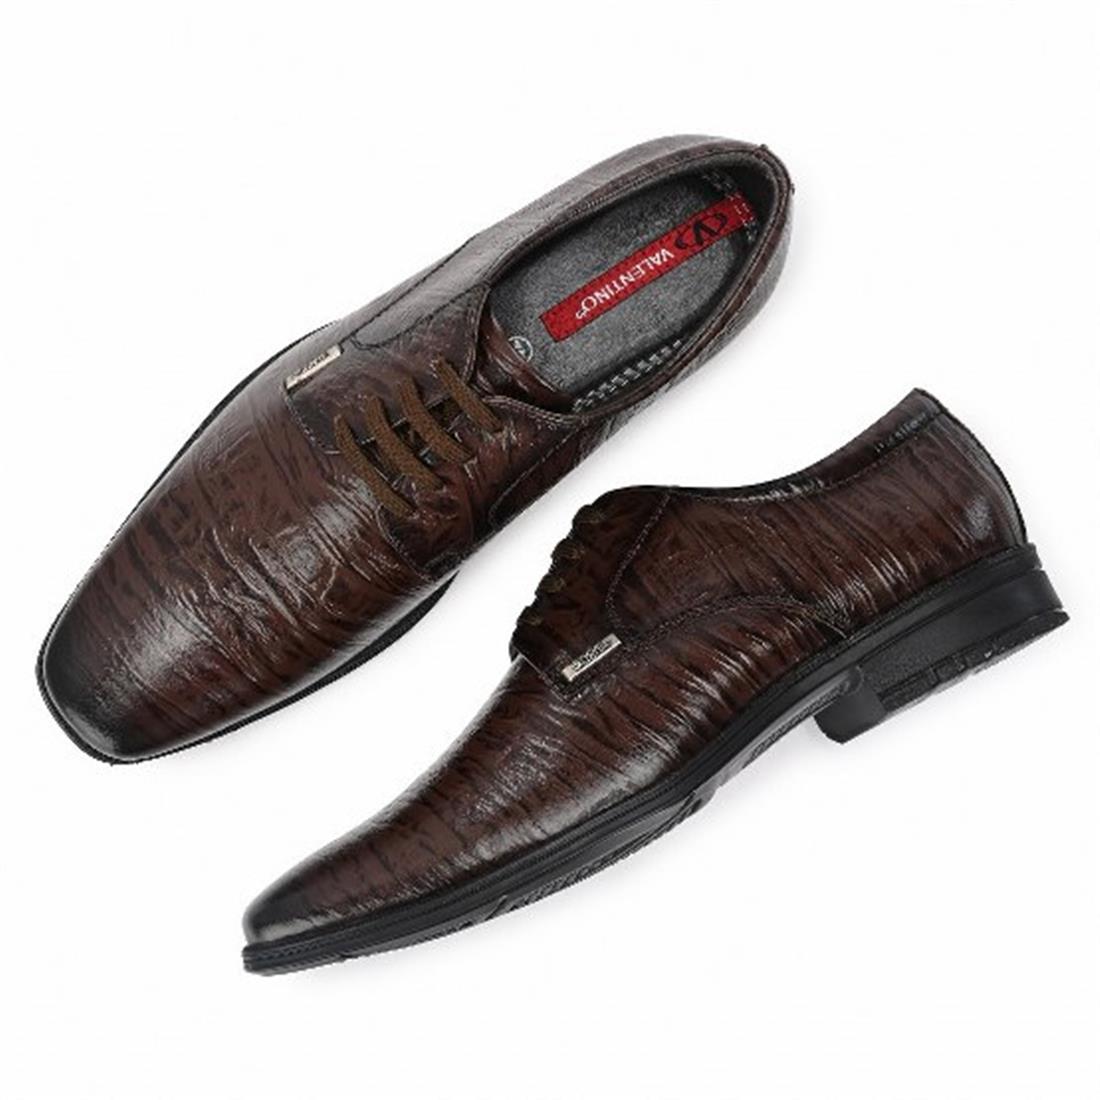 NEWTOP-63 MEN LEATHER BROWN FORMAL LACE UP DERBY